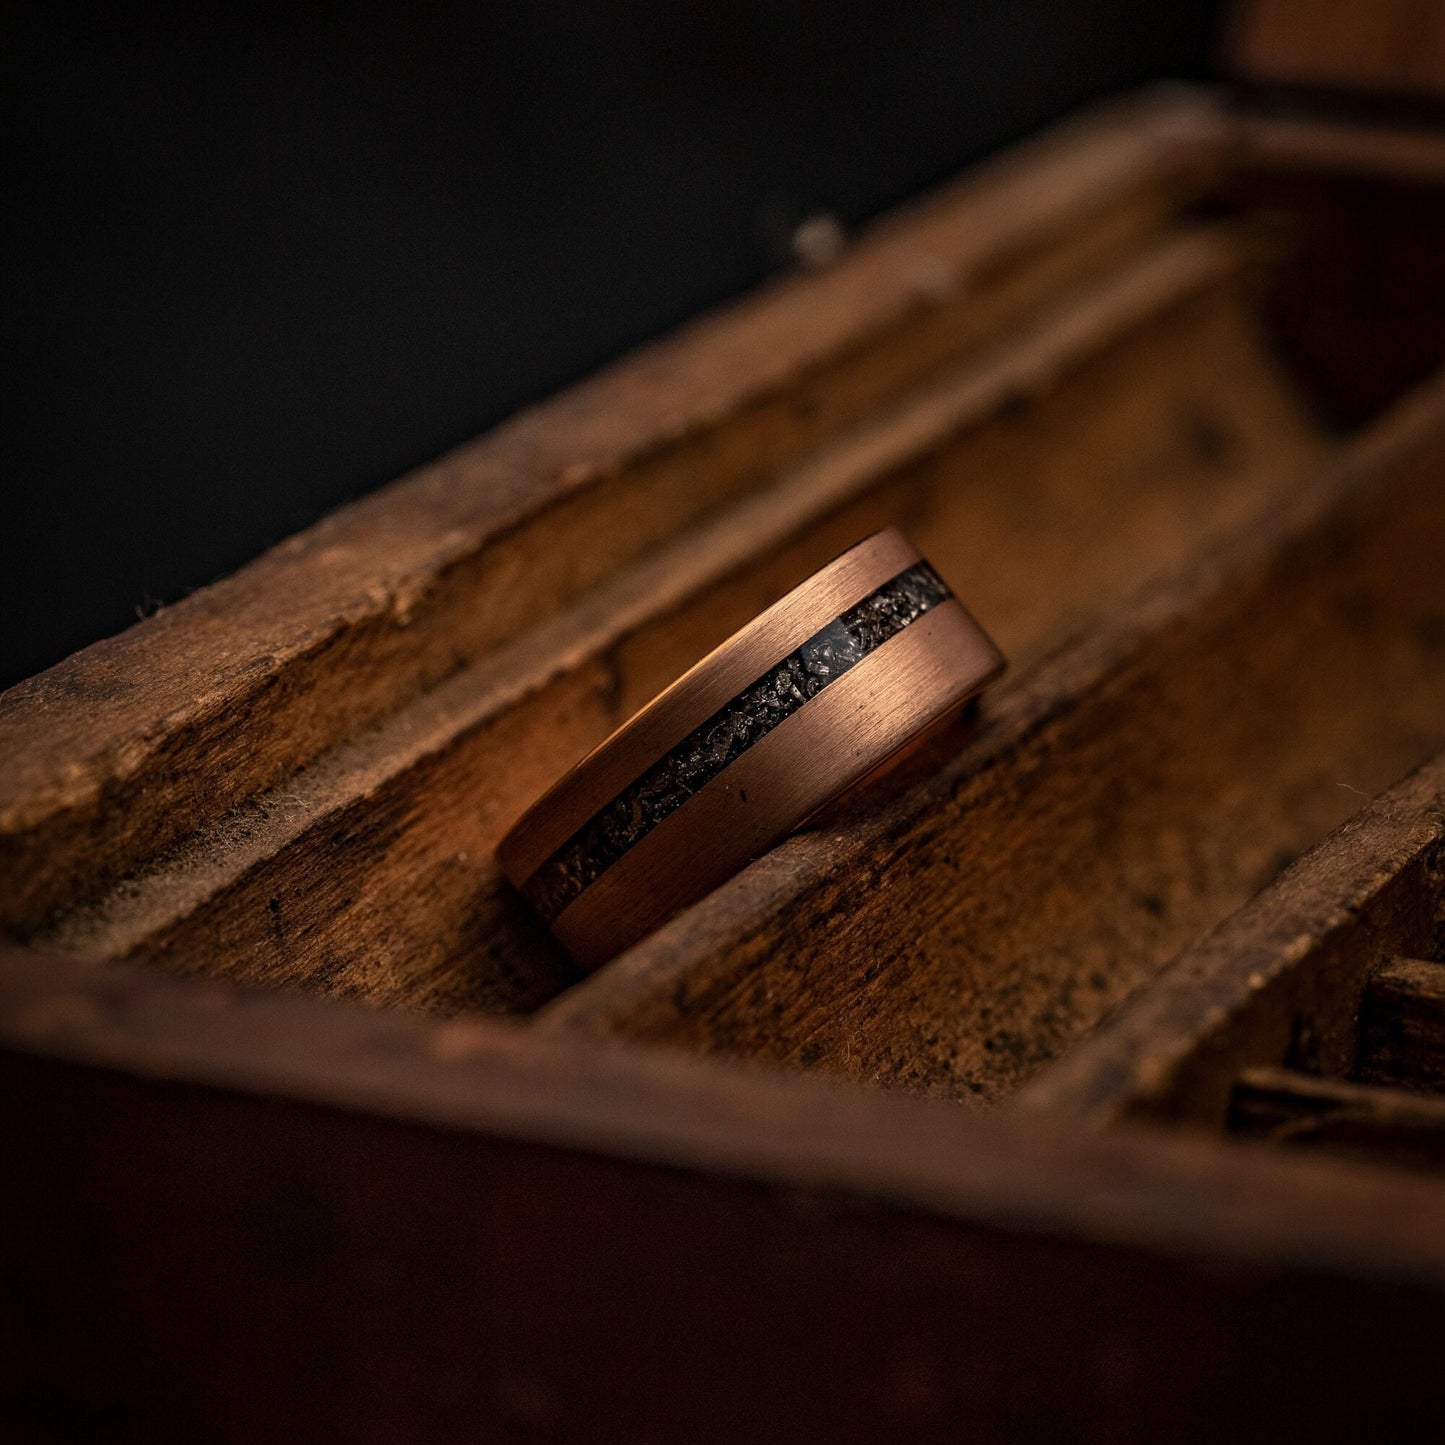 Elegant rose gold wedding band adorned with authentic meteorite inlay.